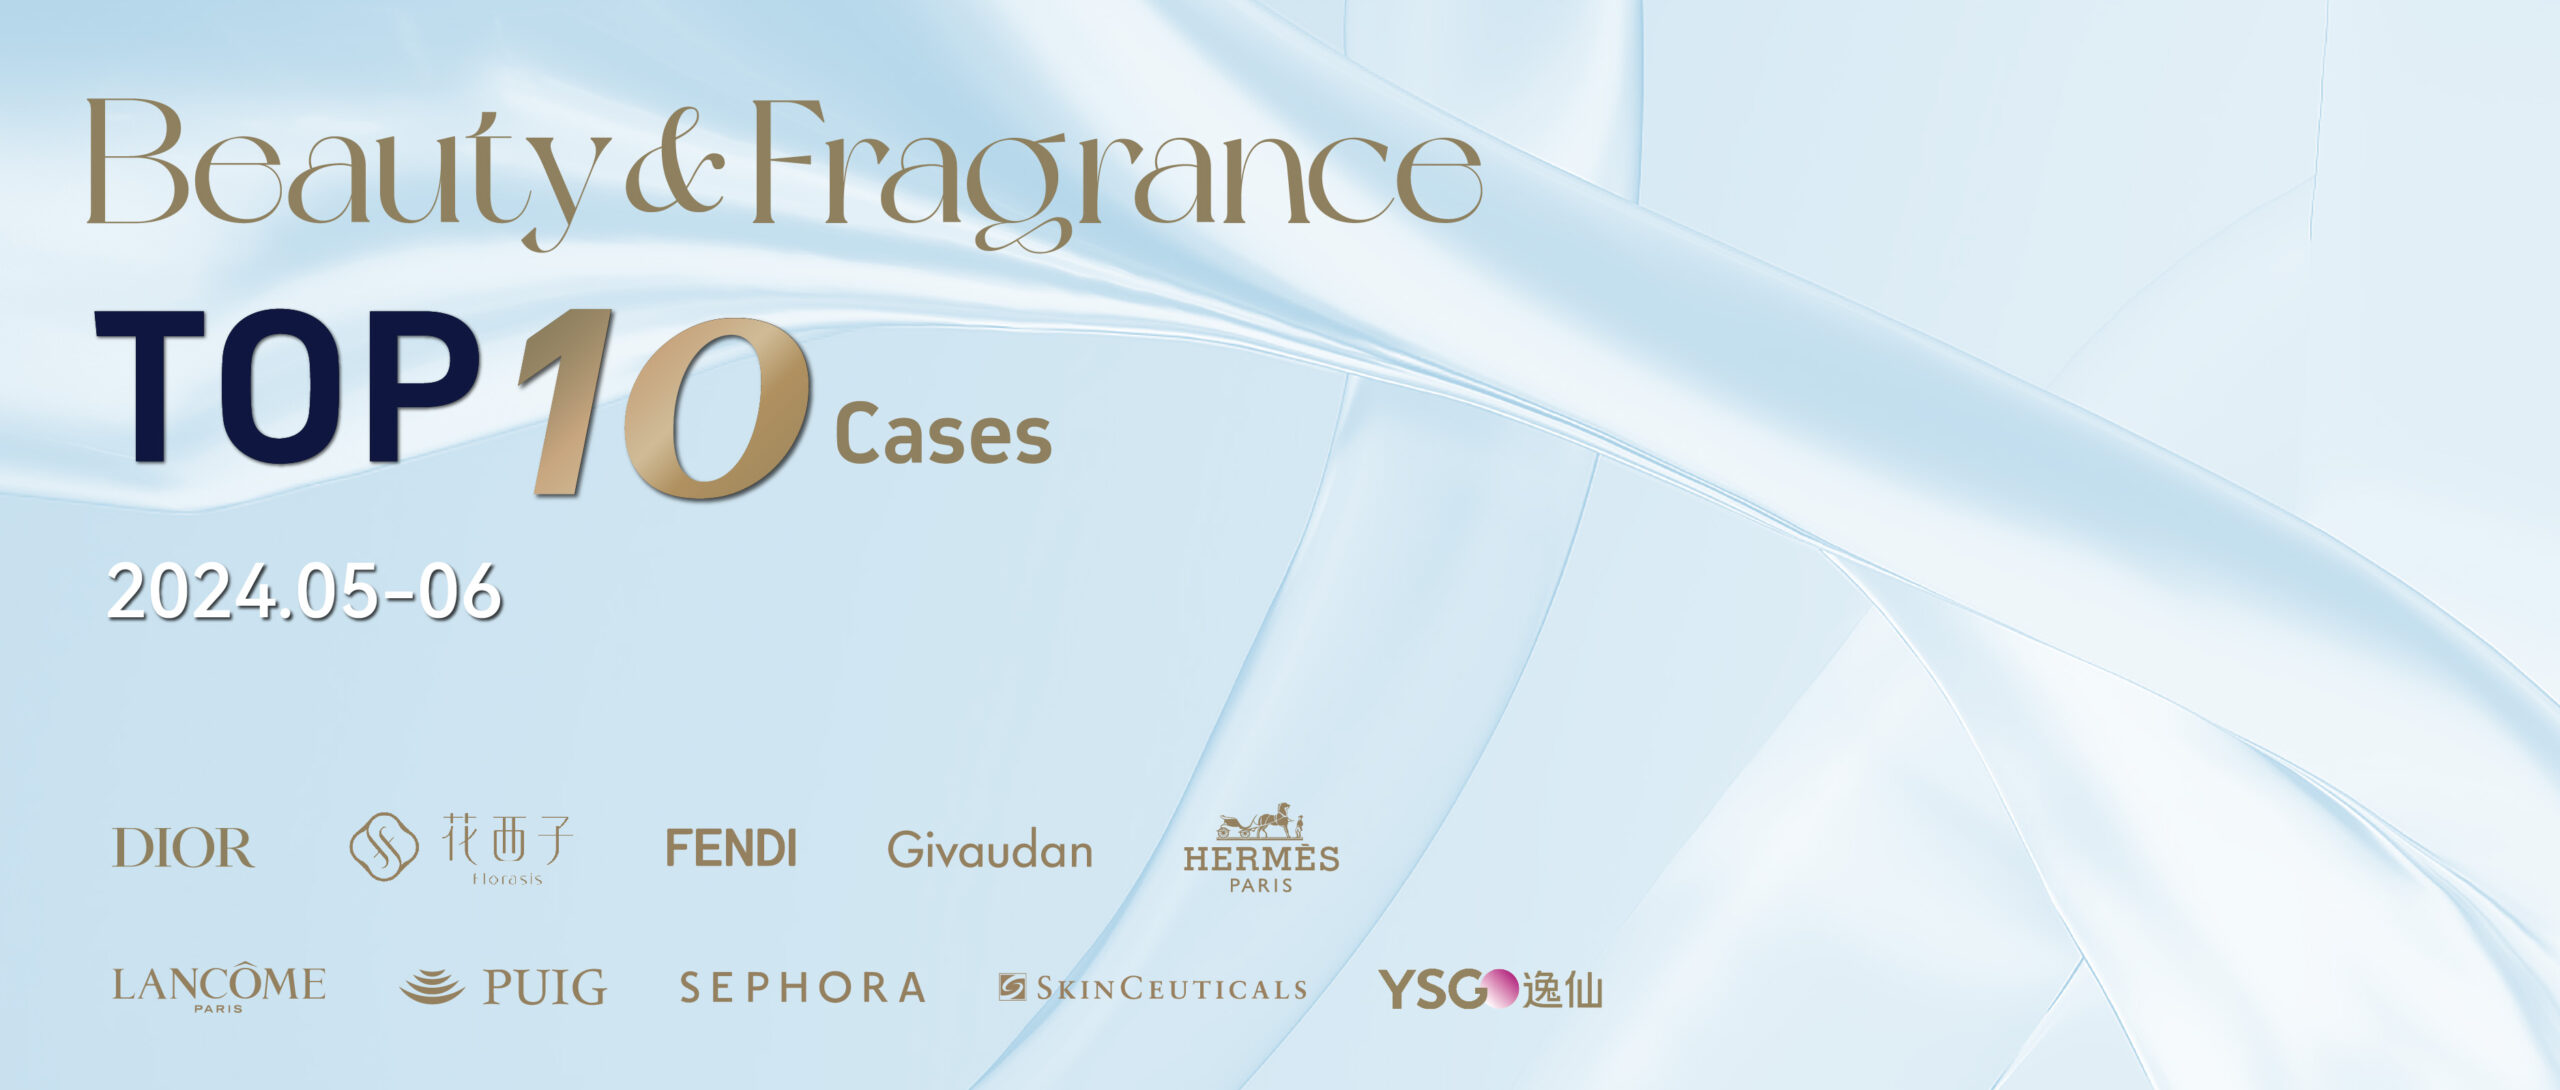 Who Are the Top10 Beauty & Fragrance Brands Cases (May-June 2024)?